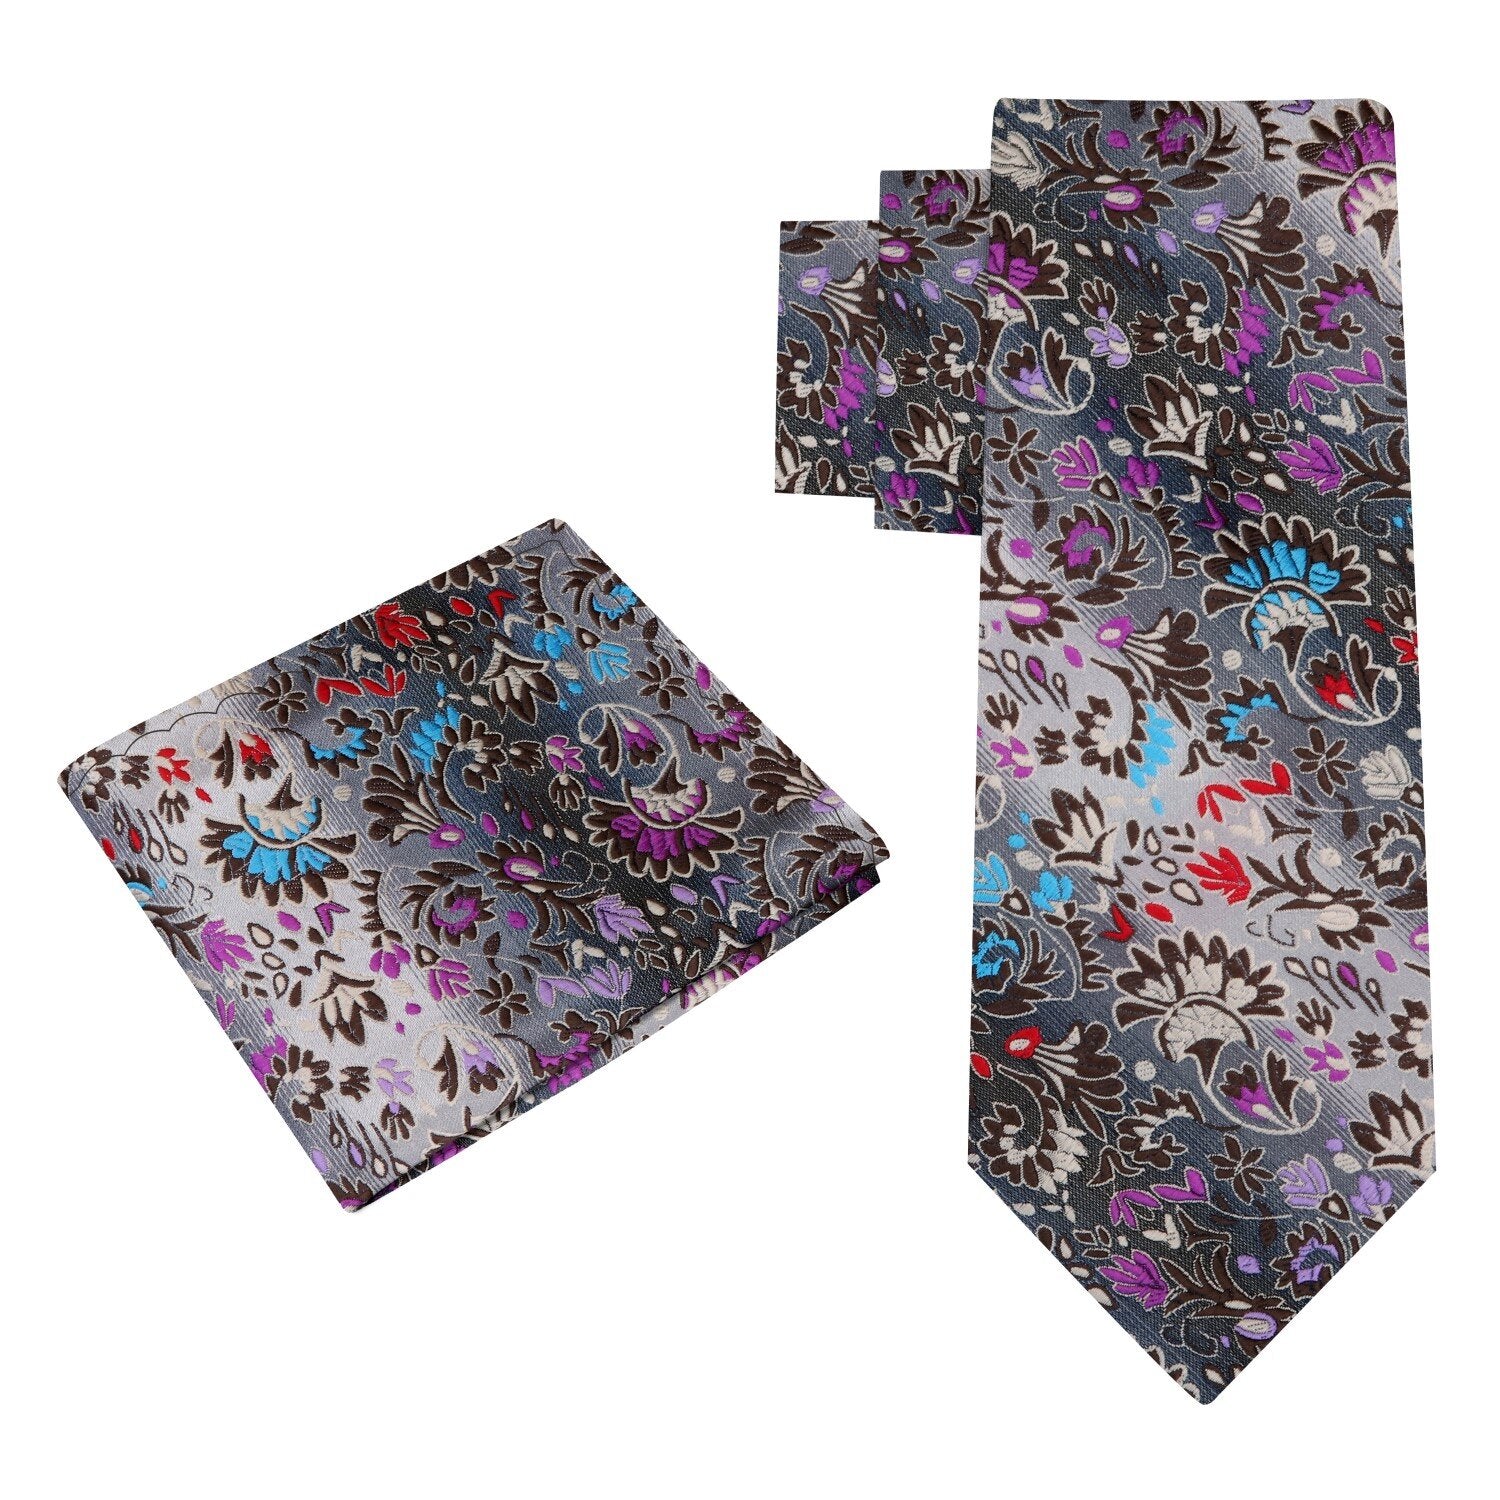 Alt View: A Grey, Blue, Red Small Floral Pattern Silk Necktie, Matching Pocket Square